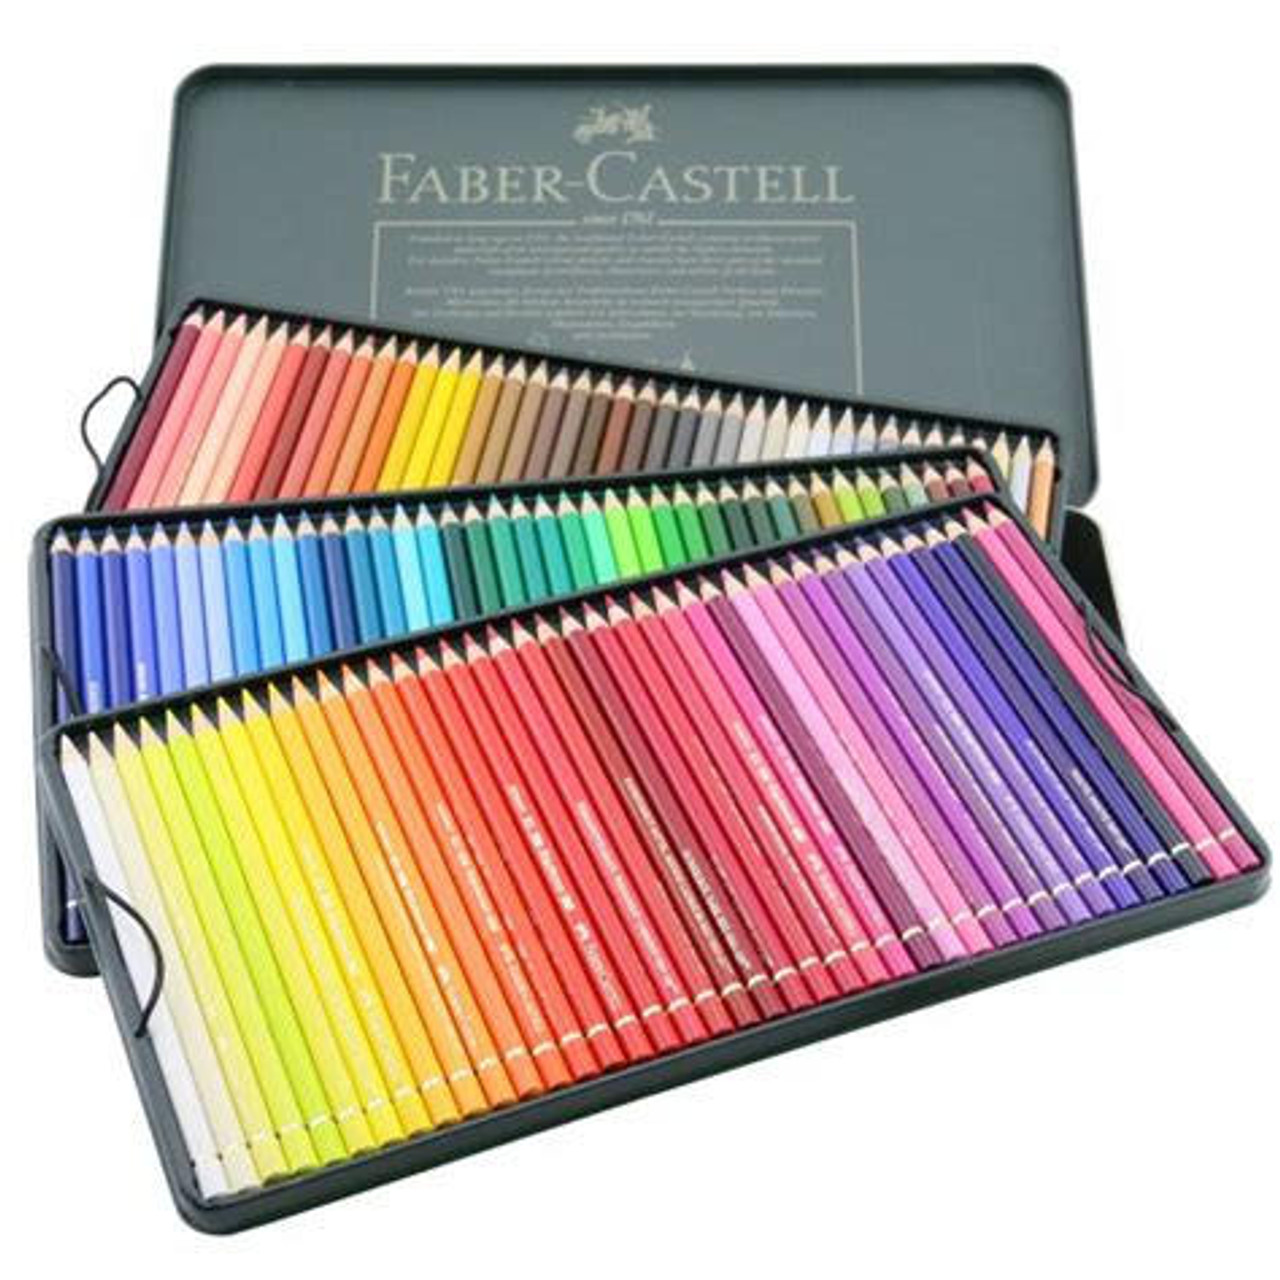 YYQTGG Polychromos Colored Pencils, Fade Resistant Delicate Wood 120  Colored Pencils 120 Colors with Green Box for Drawing Pencils Coloring  Pencils